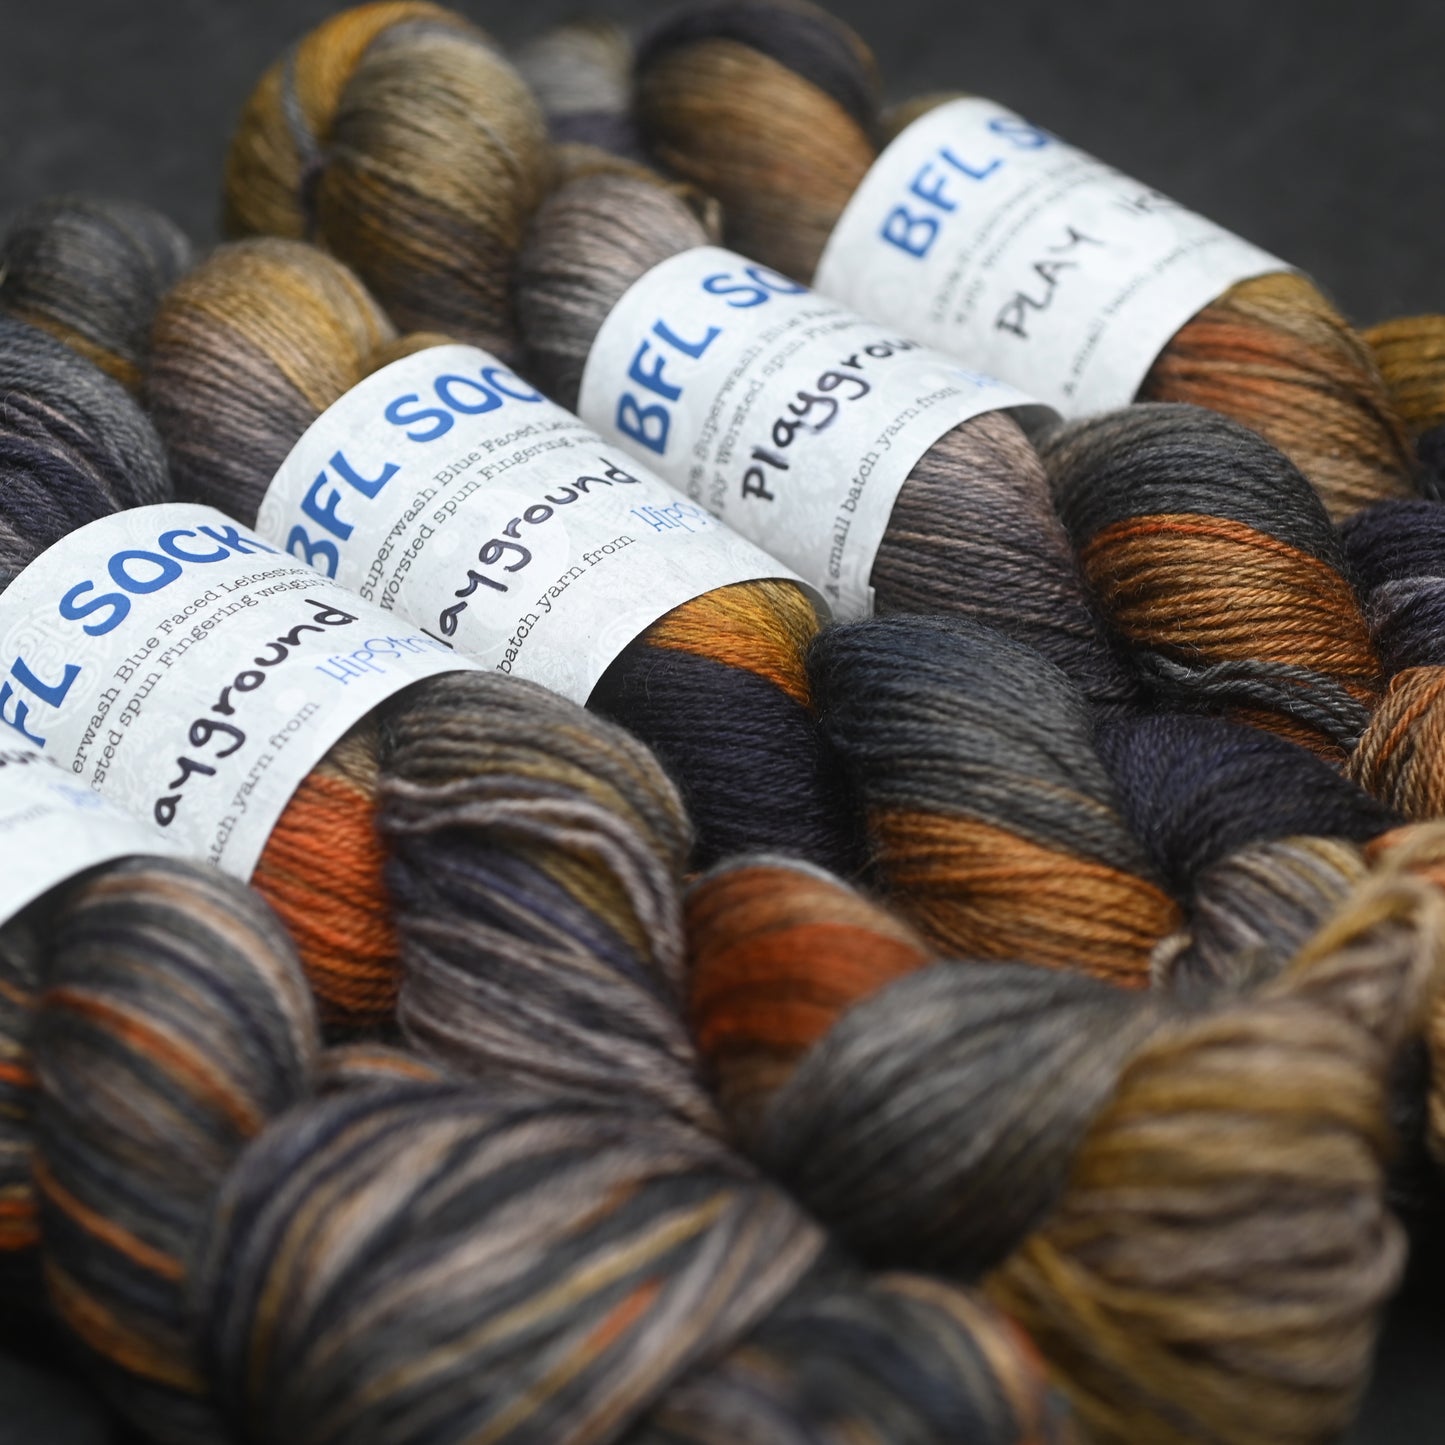 Playground on Hand Dyed SW Blue Faced Leicester Wool Sock Yarn - 437 yd/100g